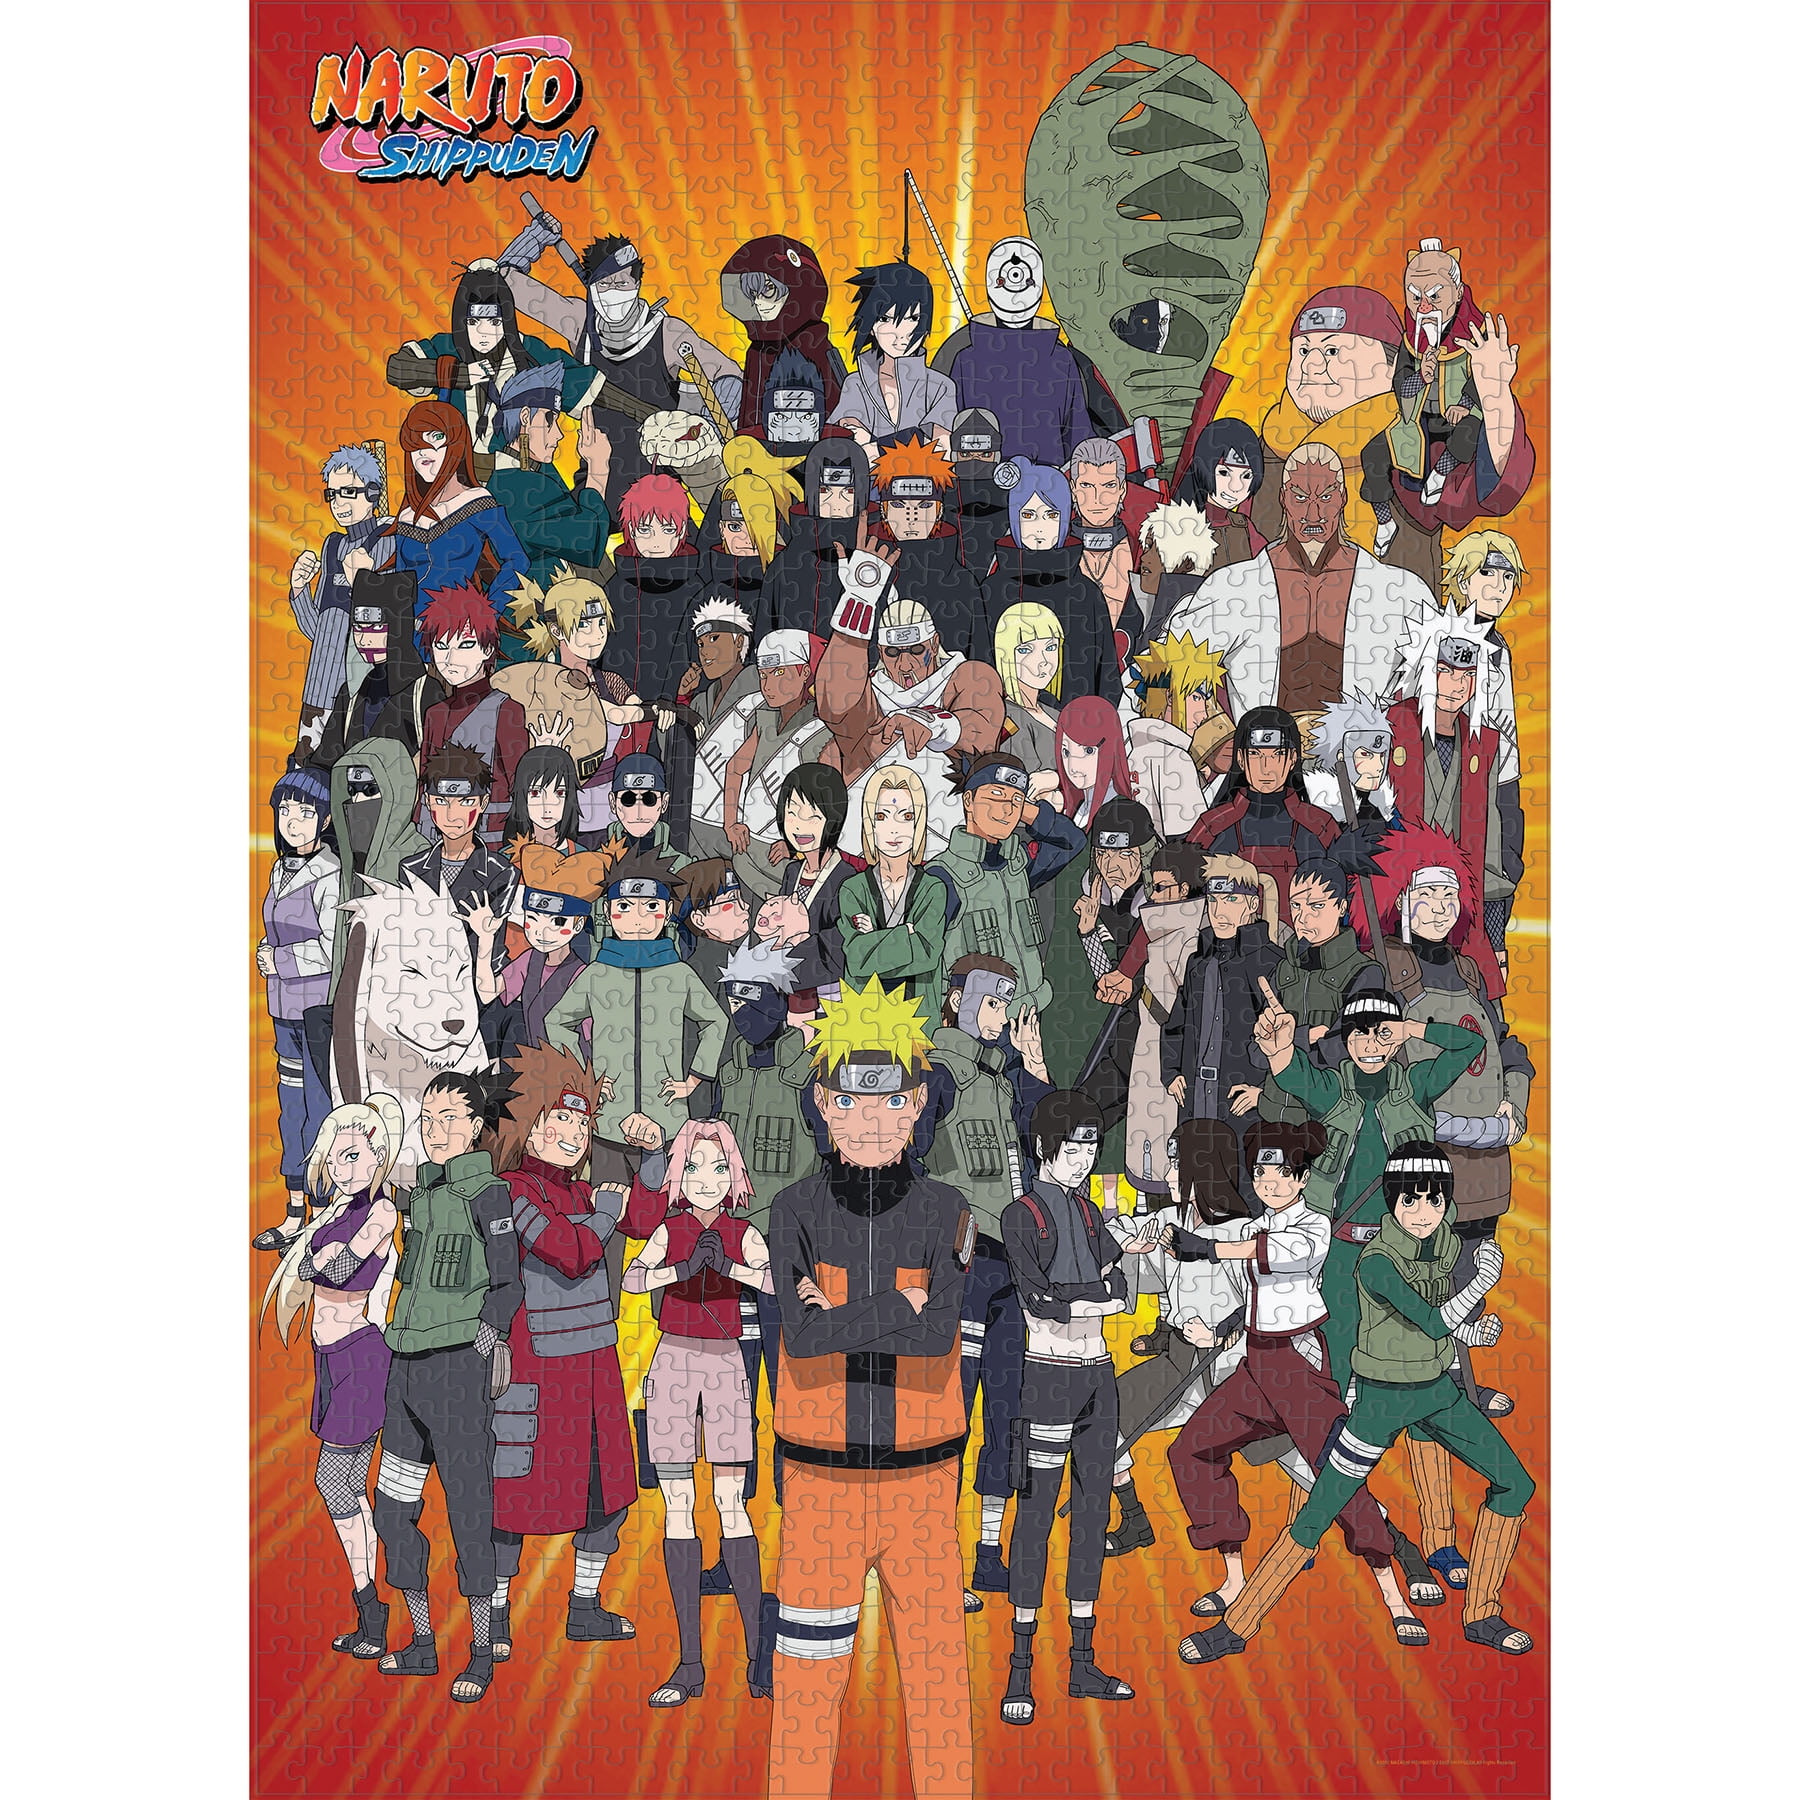 USAopoly Naruto Never Forget Your Friends 1000-Piece Puzzle 